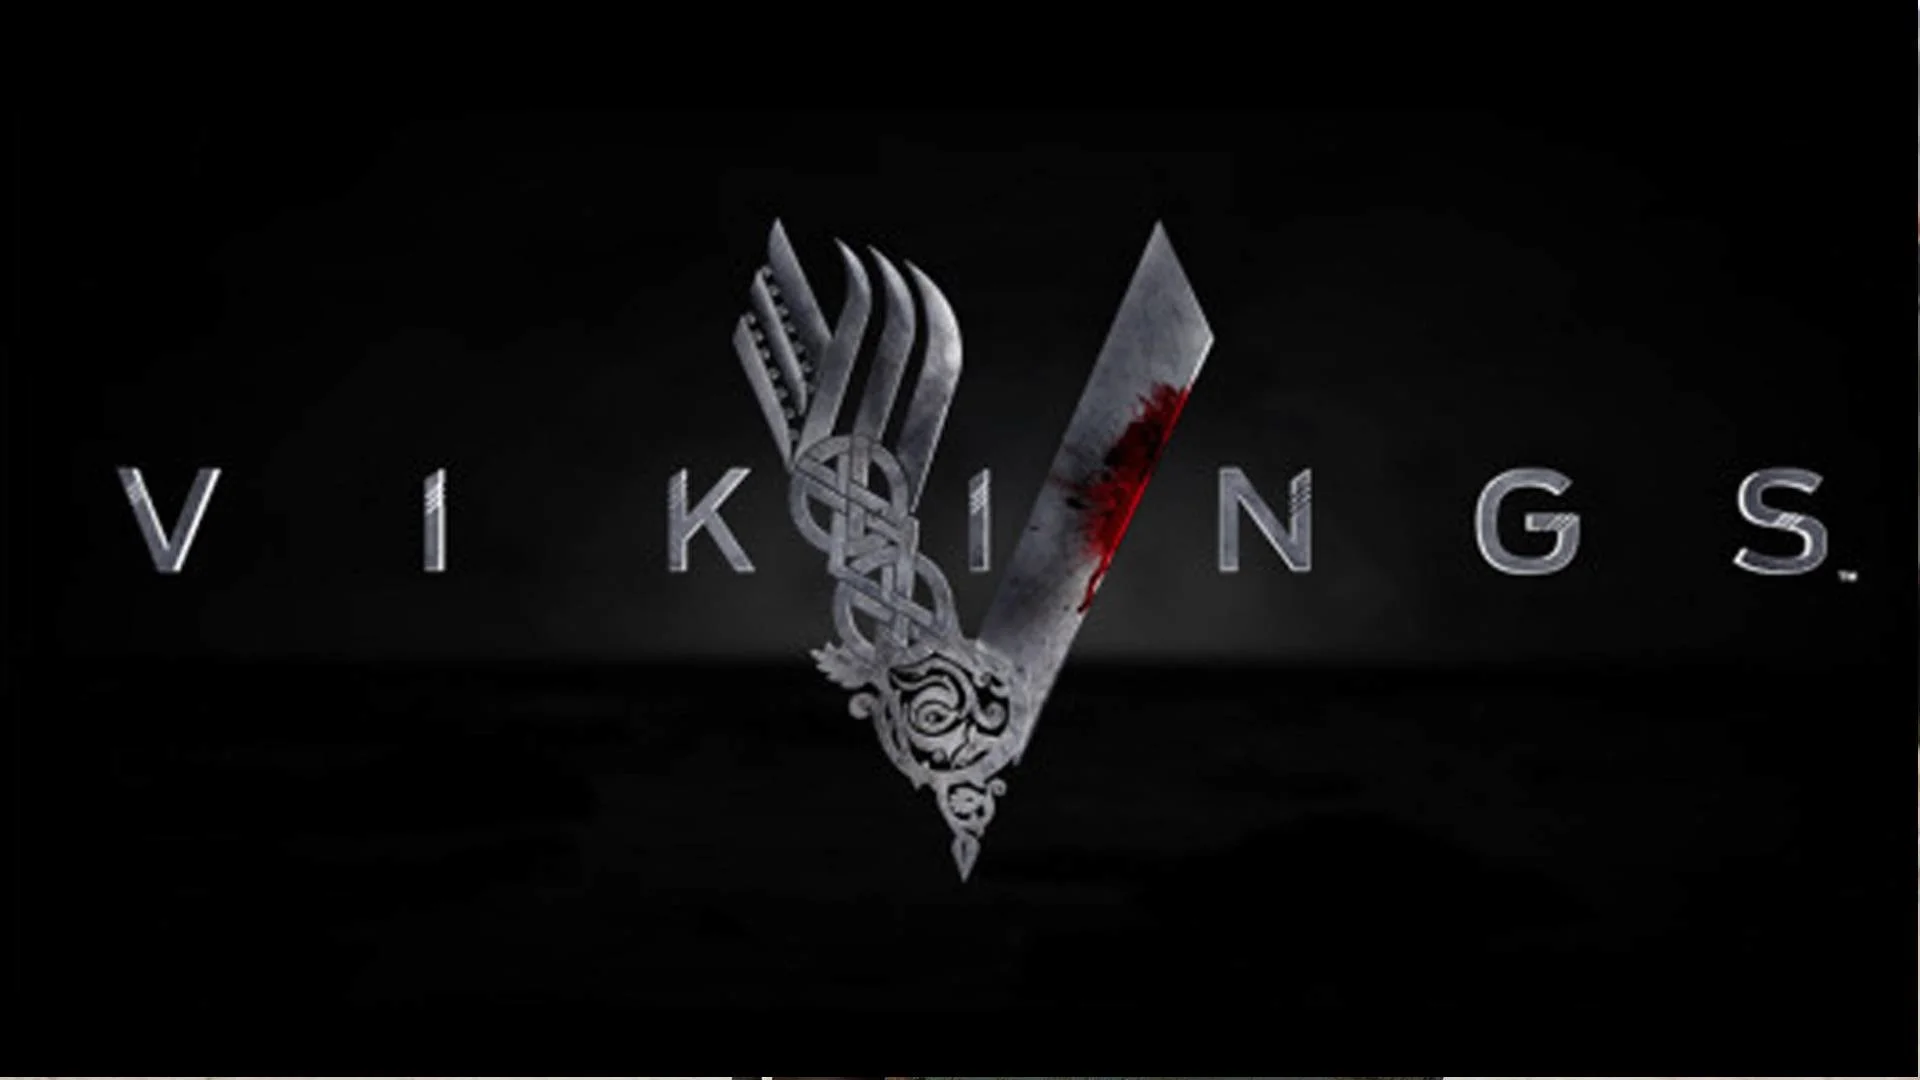 Vikings Wallpapers Pictures Images | HD Wallpapers | Pinterest | Vikings,  Hd wallpaper and Wallpaper